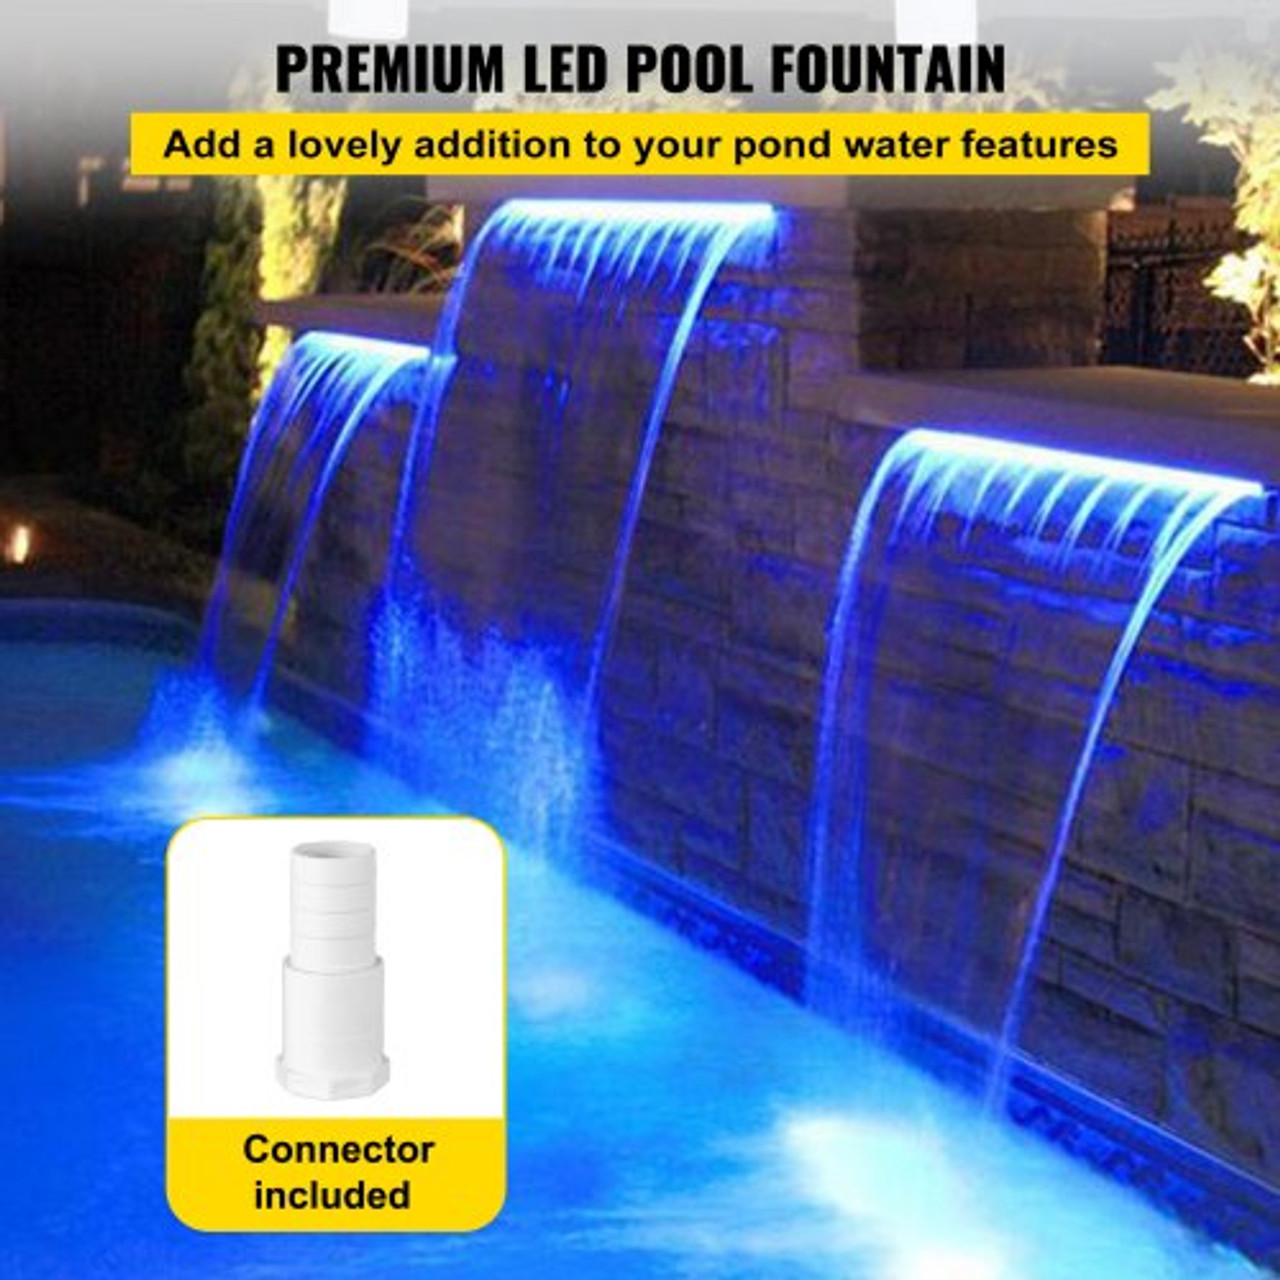 Pool Fountain Spillway 11.8x3.2x8.1 Inches, Fountain Spilway Blue Strip LED Light, Pool Waterfall Fountain Solid Acrylic, Pool Waterfall for Garden Pond, Swimming Pool, Squares